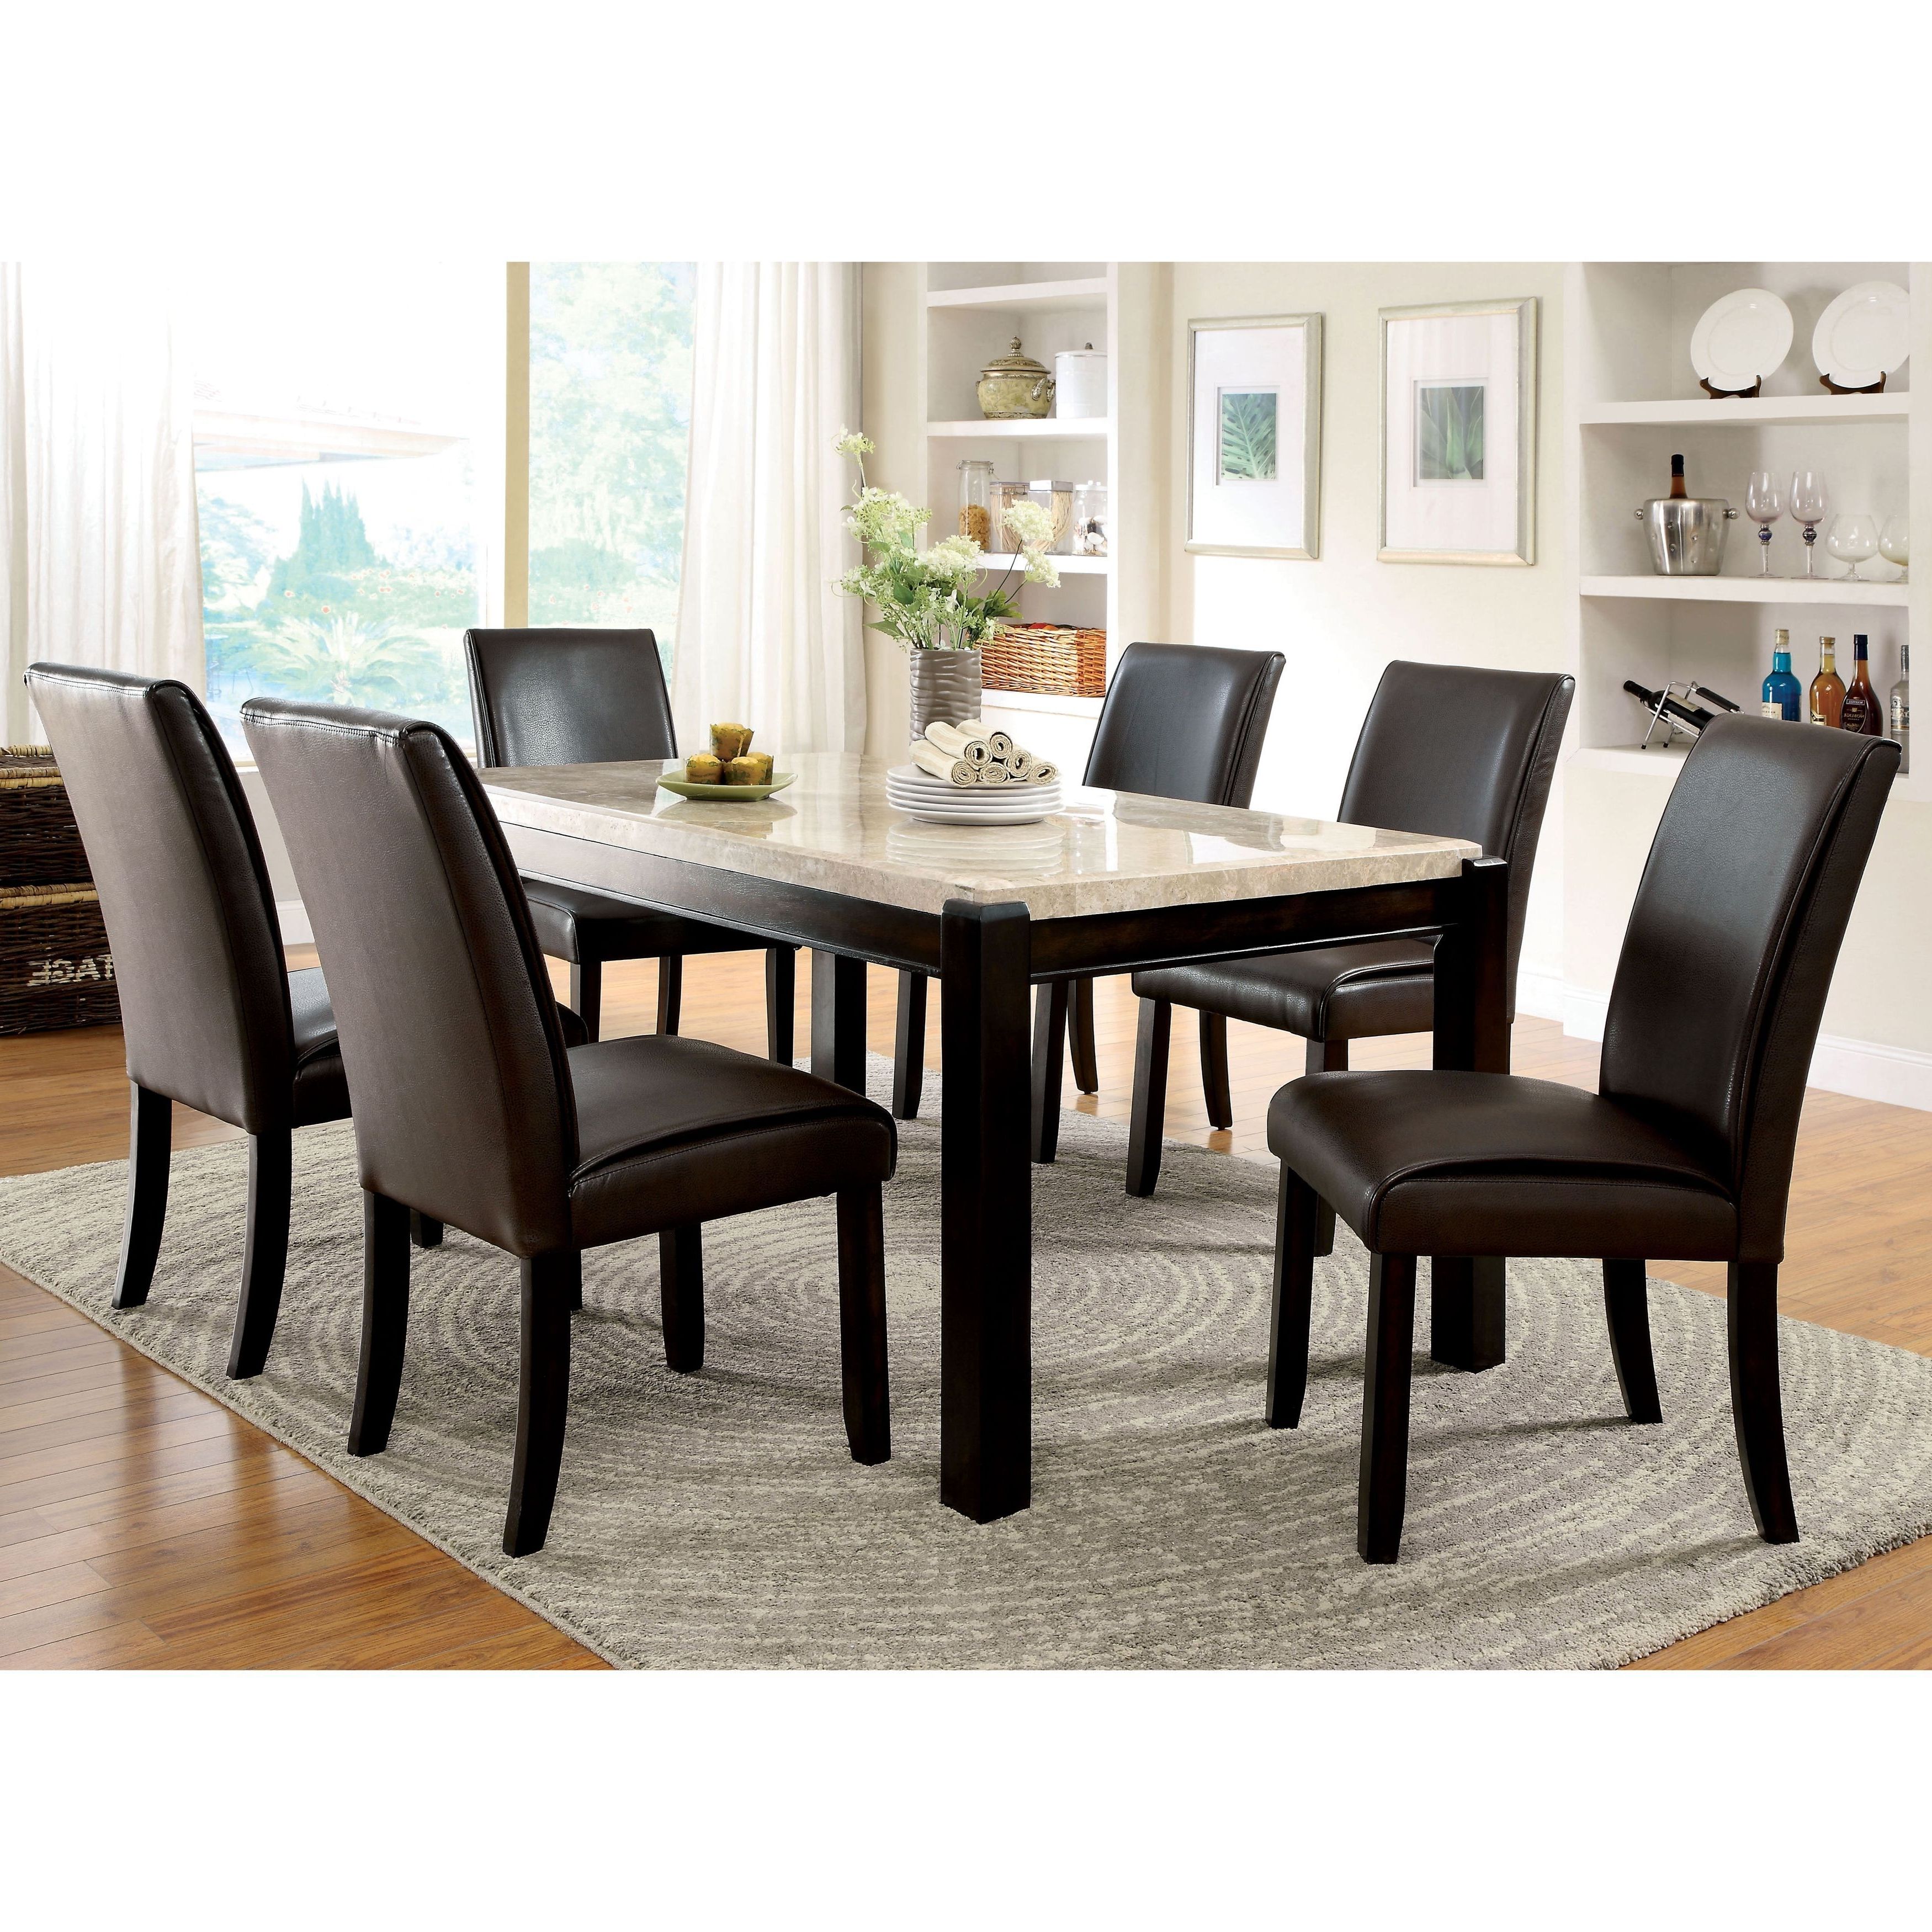 Furniture Of America Joreth 7 Piece Dark Walnut (brown) Dining Set For Best And Newest Palazzo 6 Piece Rectangle Dining Sets With Joss Side Chairs (Photo 11 of 25)